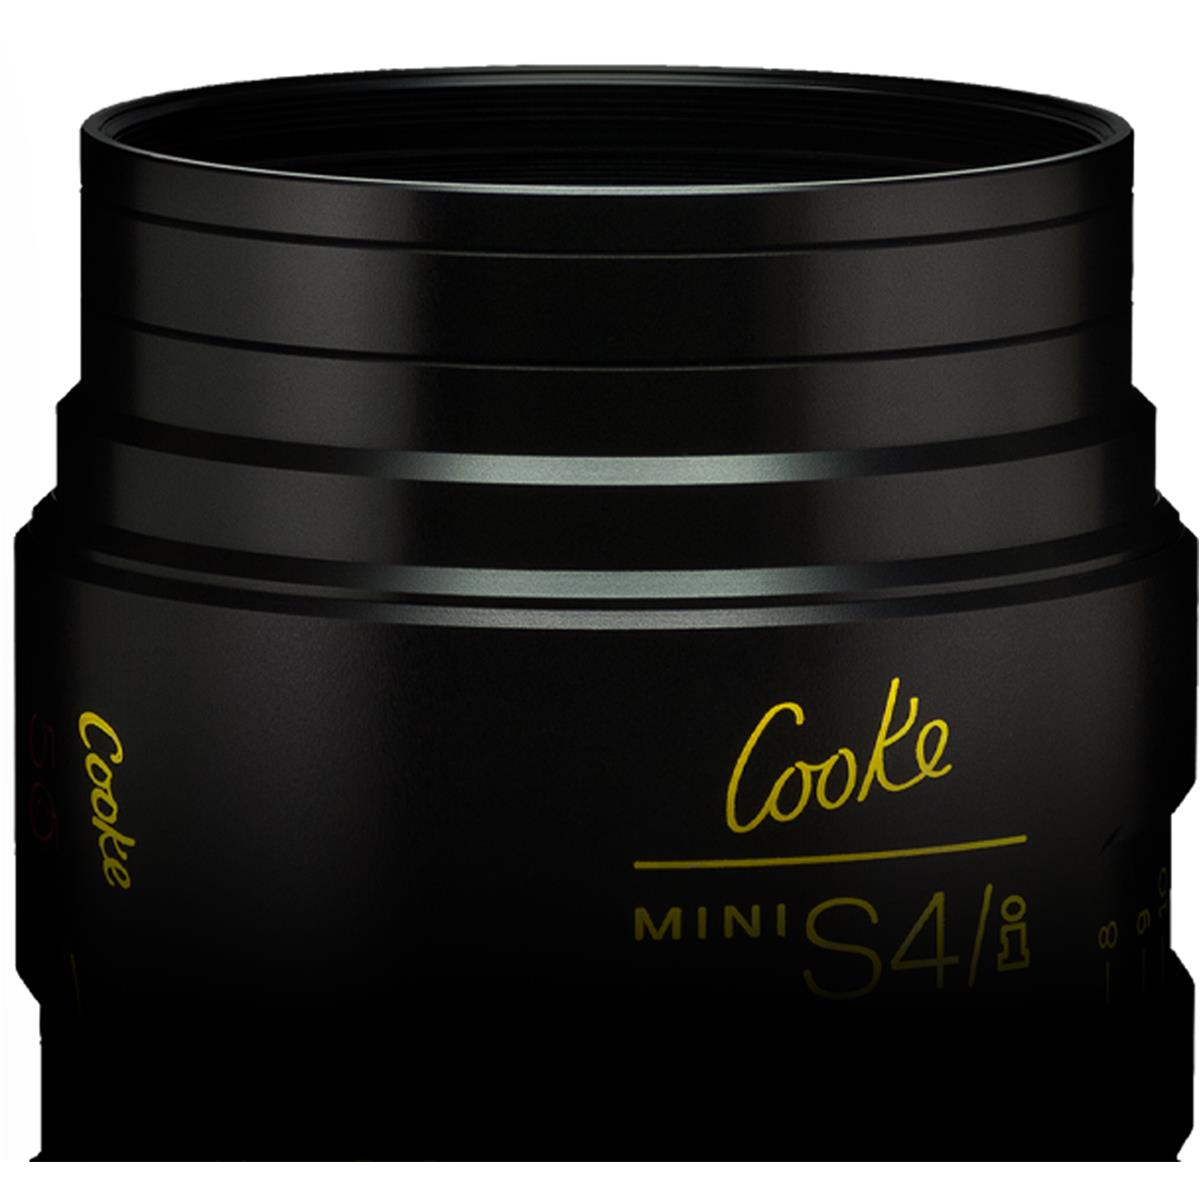 Cooke CKEP 27M